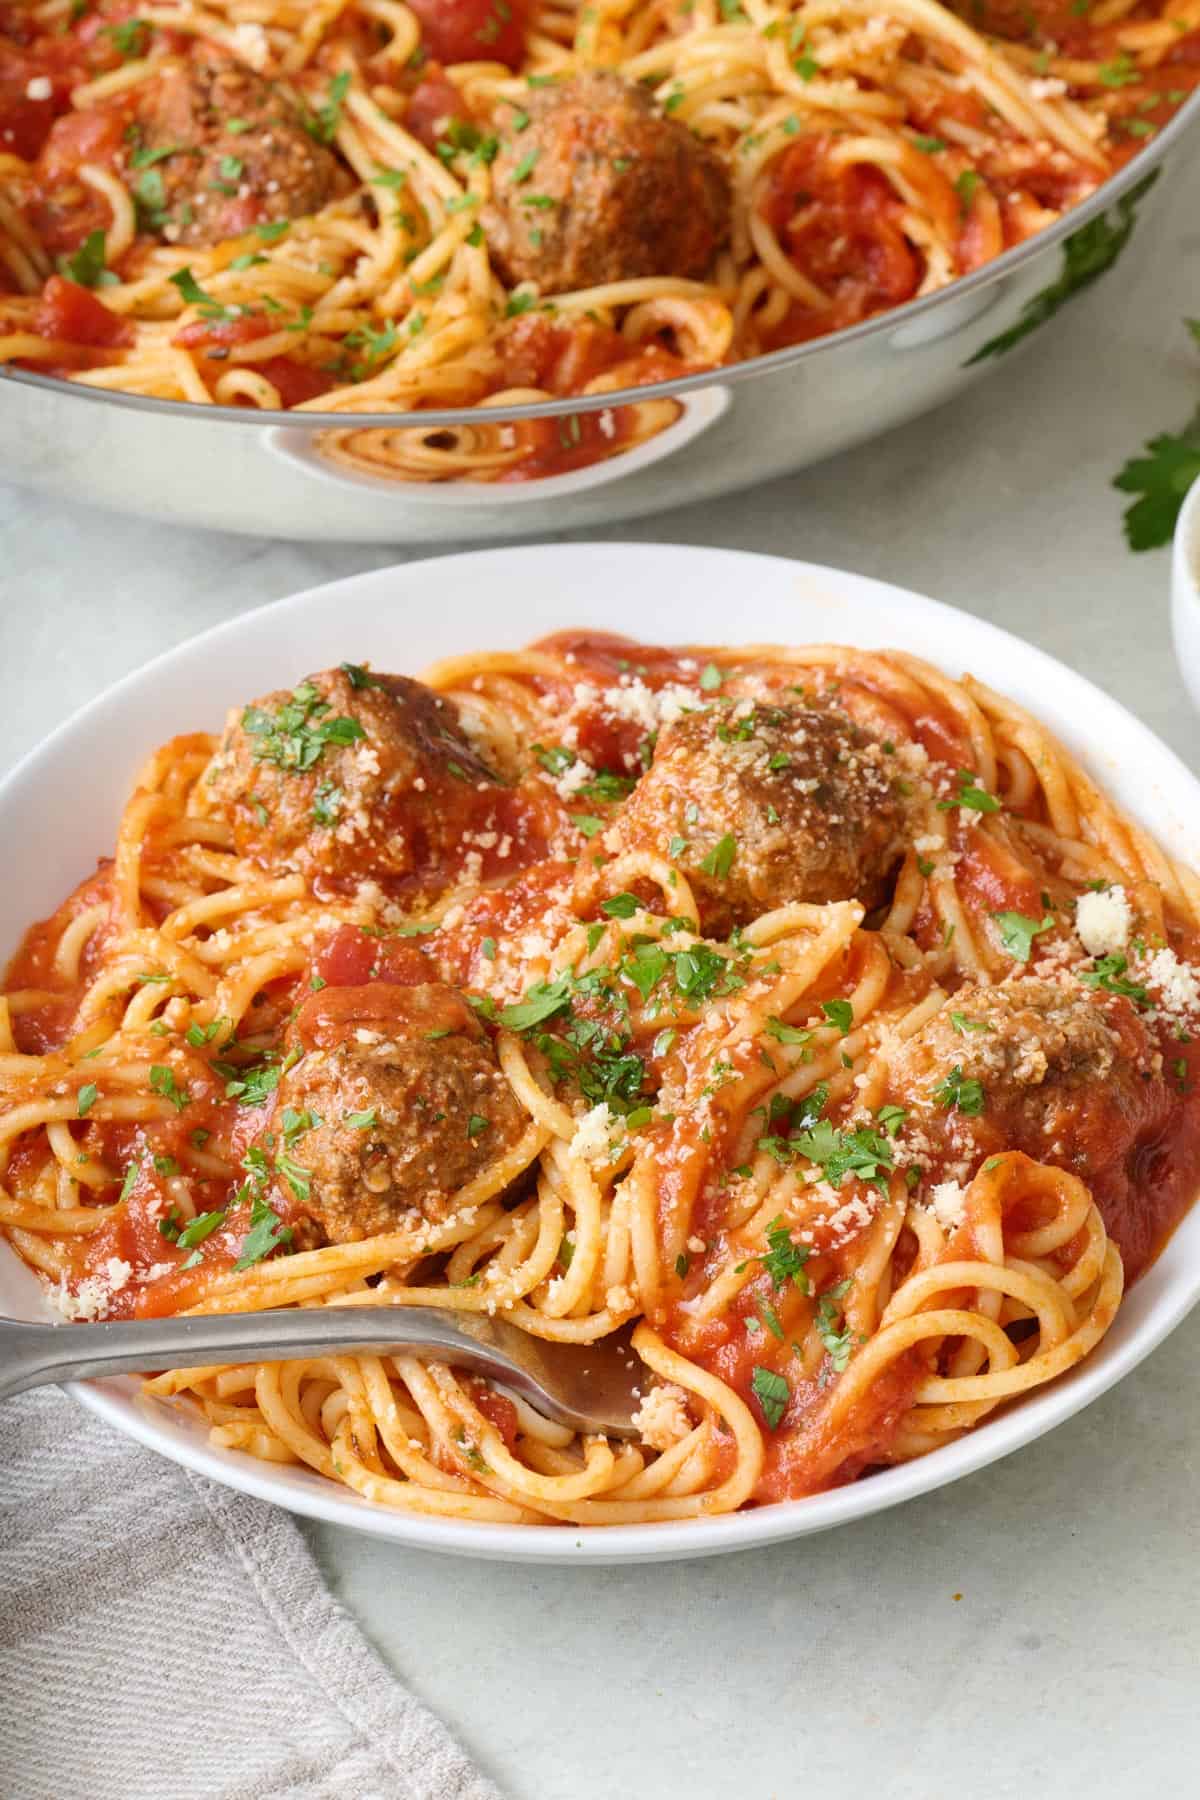 Spaghetti and meatballs in a bowl.